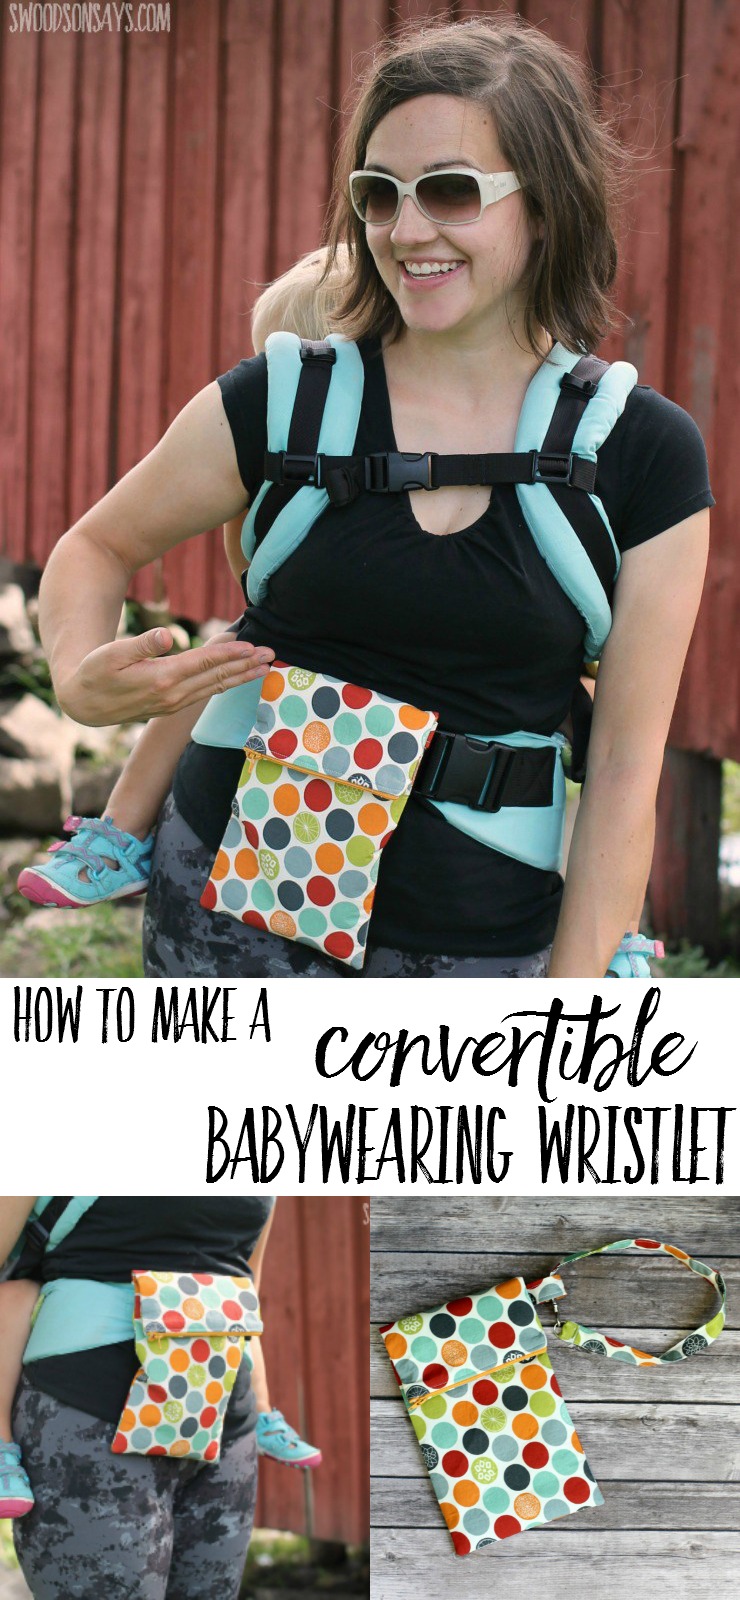 How to sew a convertible wristlet purse that is perfect for babywearing. Babywearing accessories can be expensive to buy, so sew your own bag and slid it on to your waistband for hiking! 